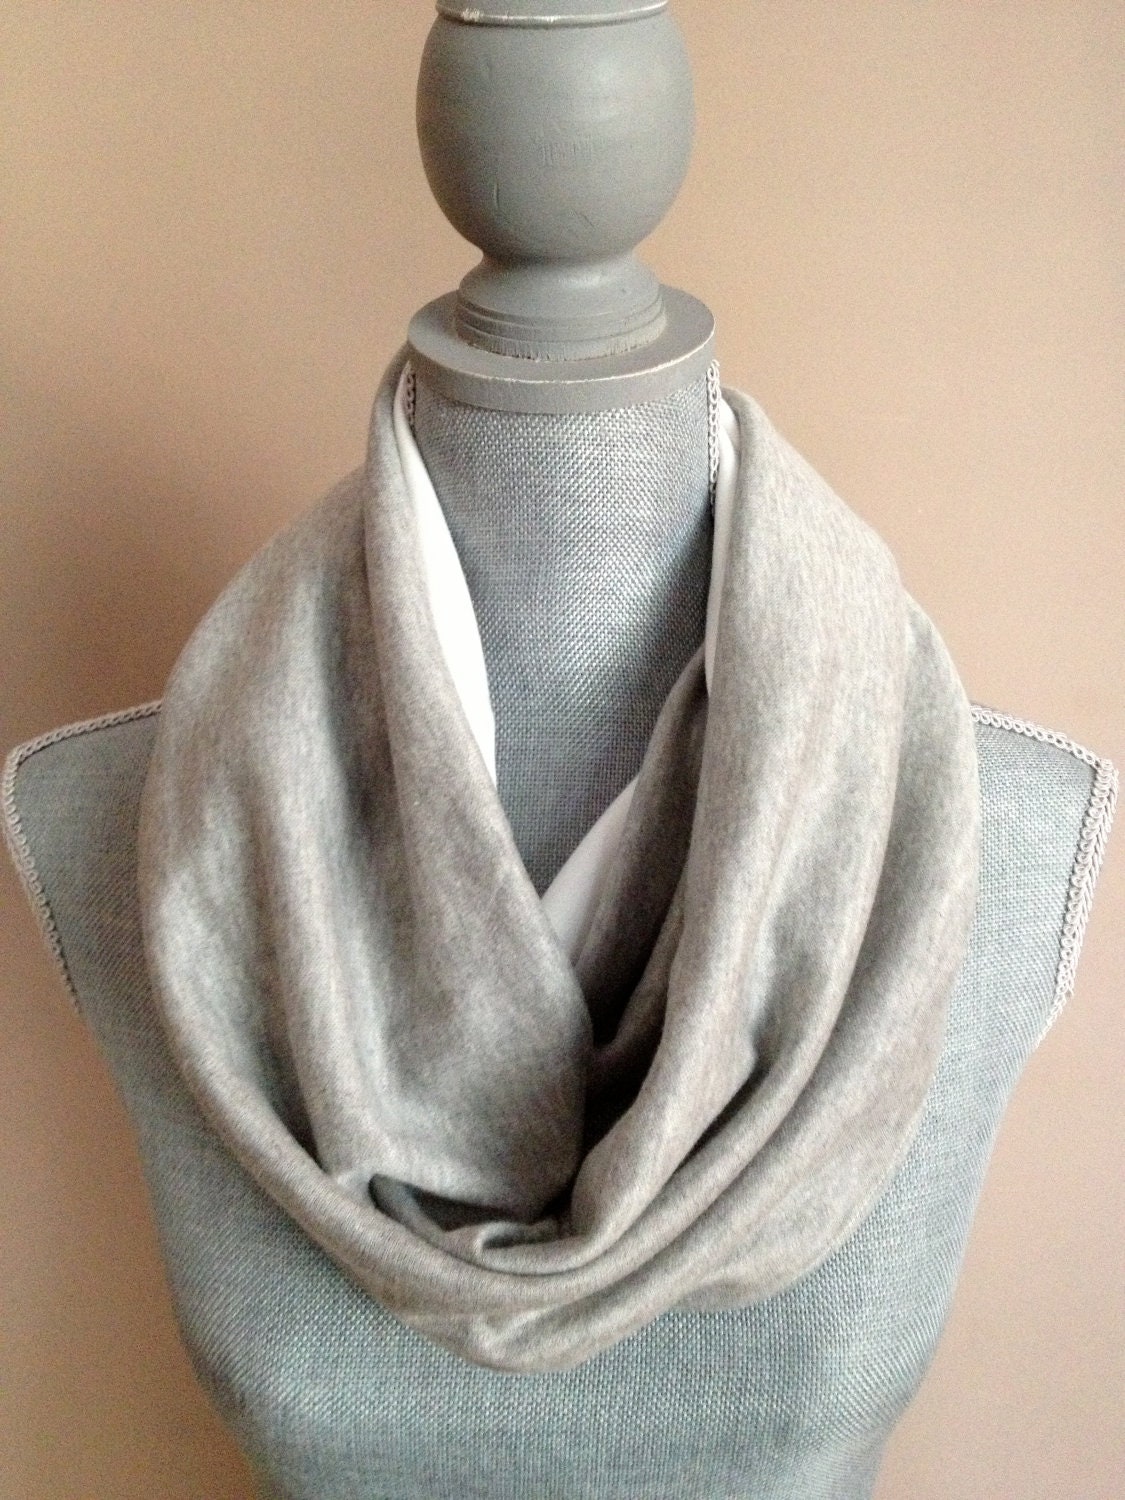 Infinity Scarf with Hidden Pocket Reversible Knit Grey and | Etsy